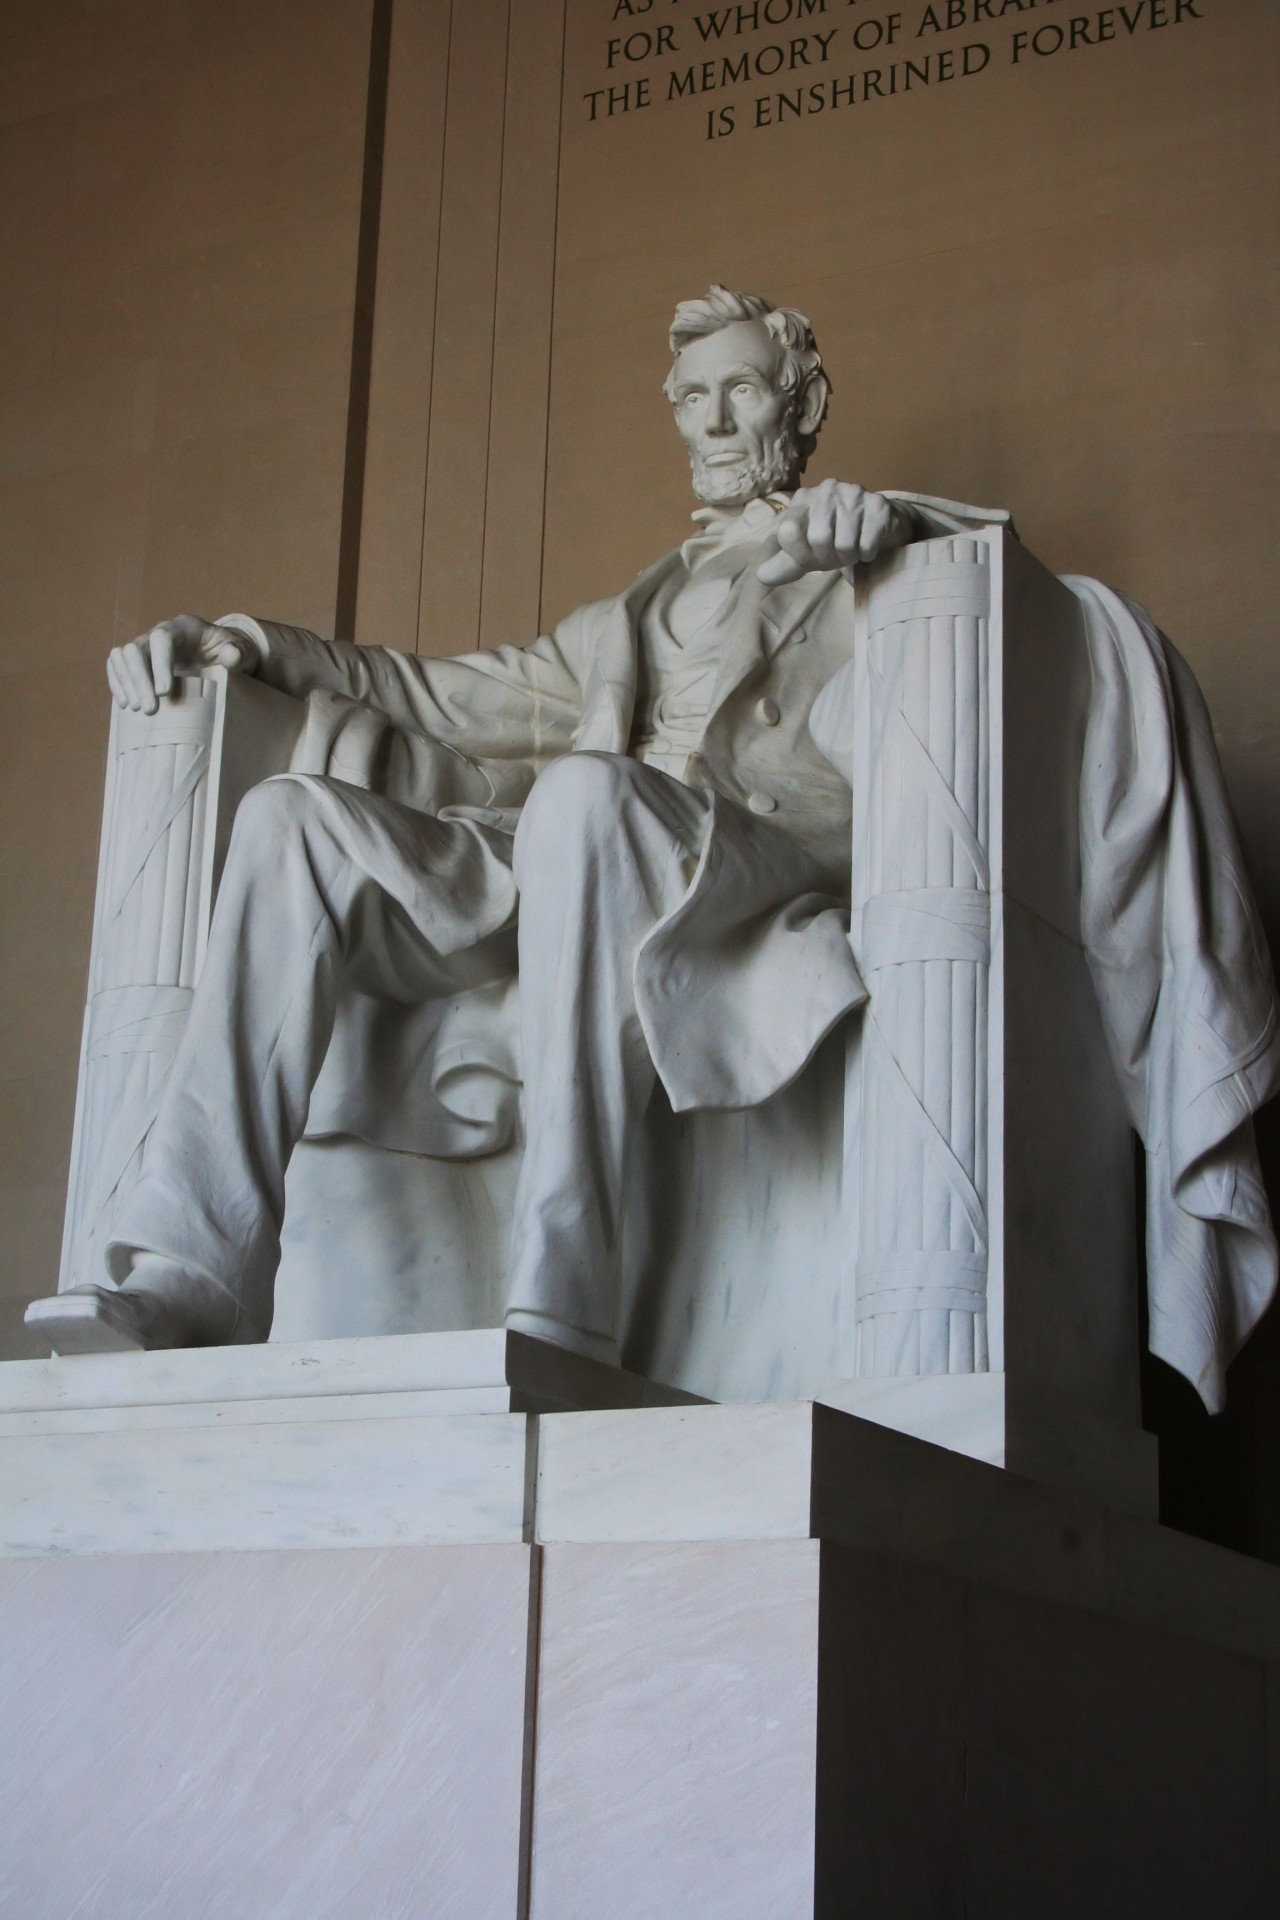 The Lincoln Memorial is an American national monument built to honor the 16th President of the United States.